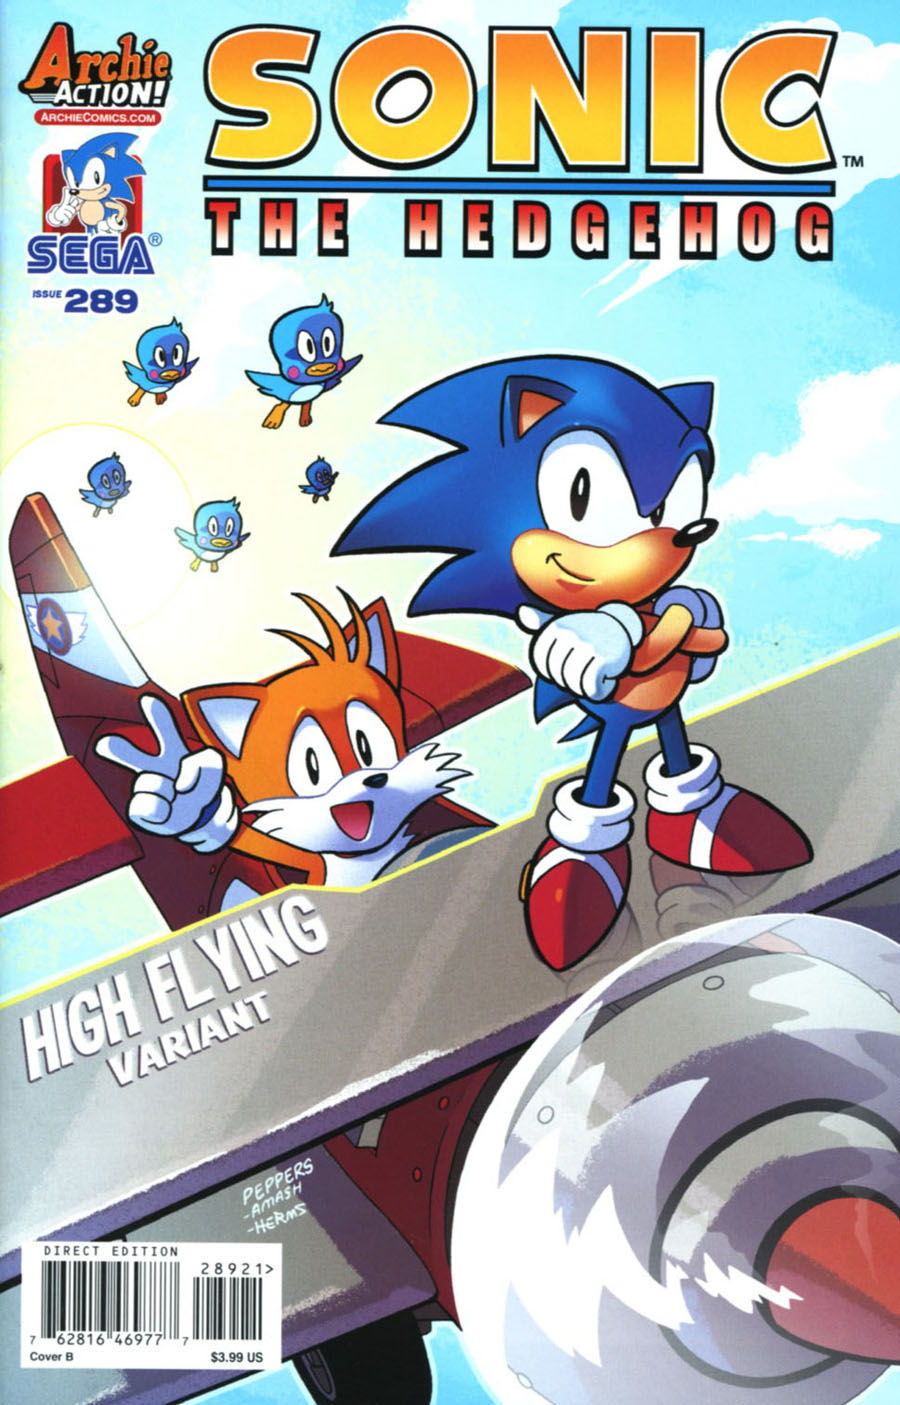 Sonic The Hedgehog Vol 2 #289 Cover B Variant Jamal Peppers High Flying Cover